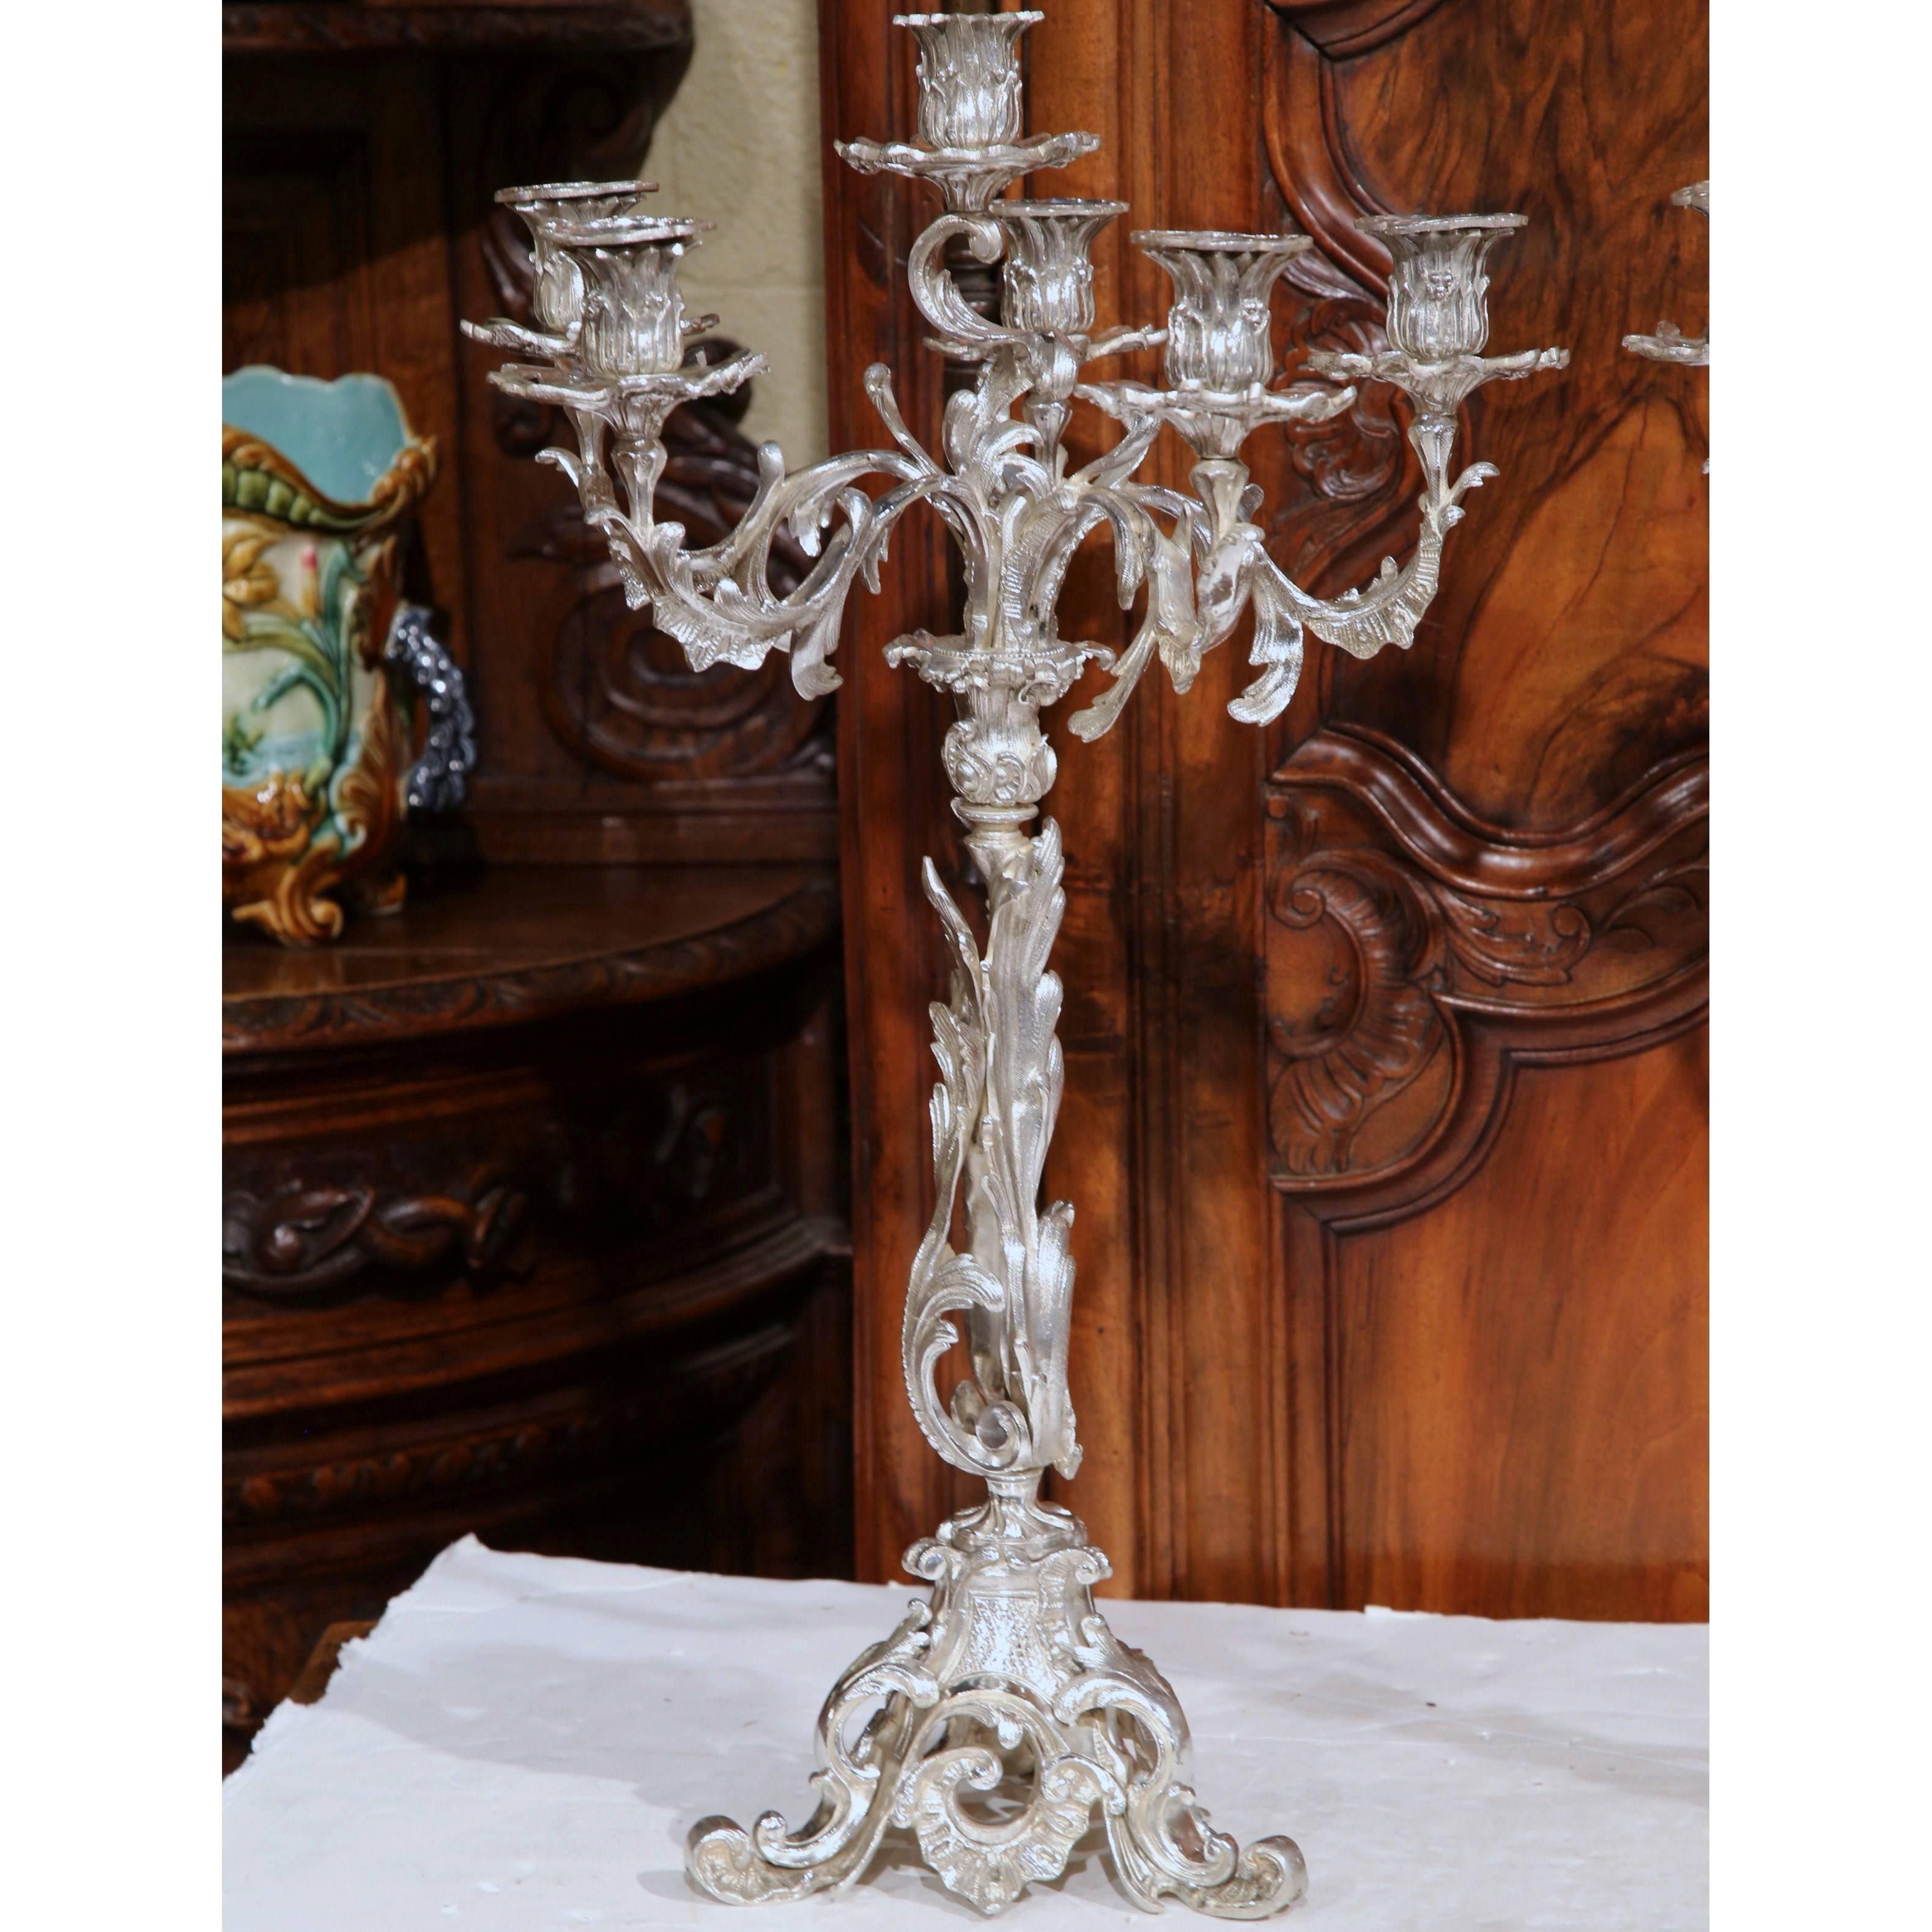 Hand-Crafted Pair of 19th Century French Louis XV Silver Plated Bronze Five-Arm Candelabras